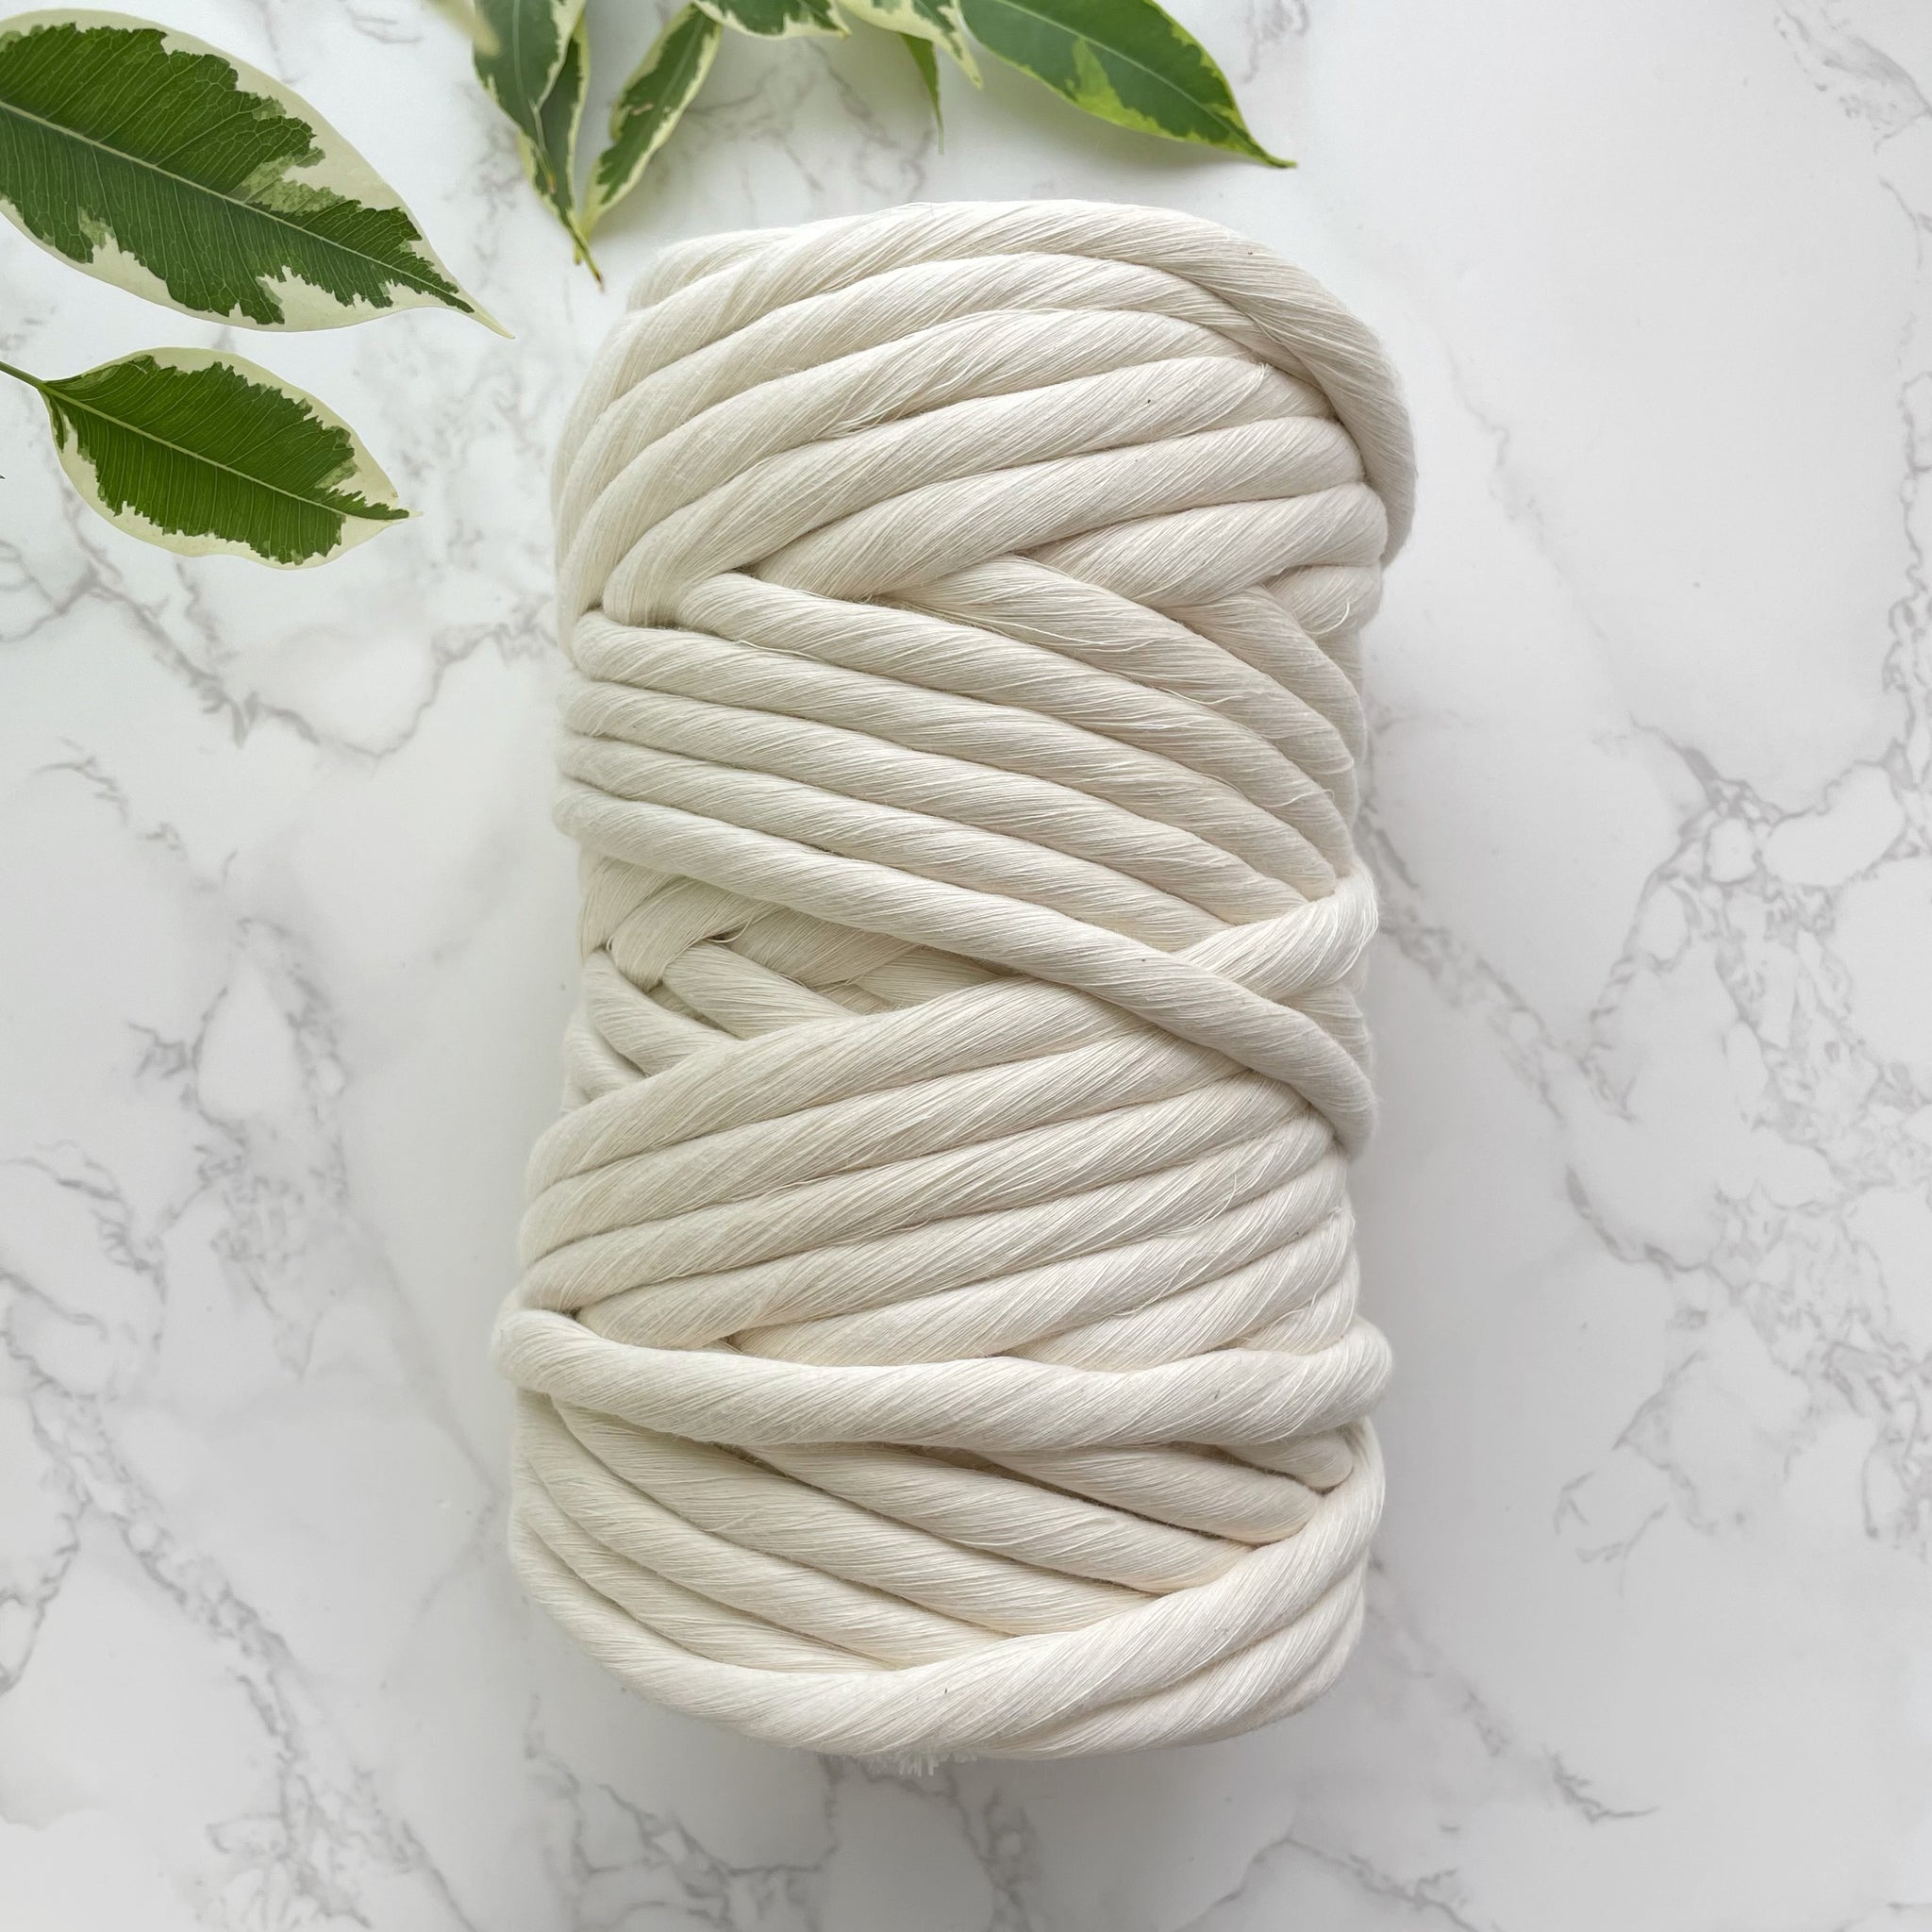 9mm Cotton String - Natural/Undyed